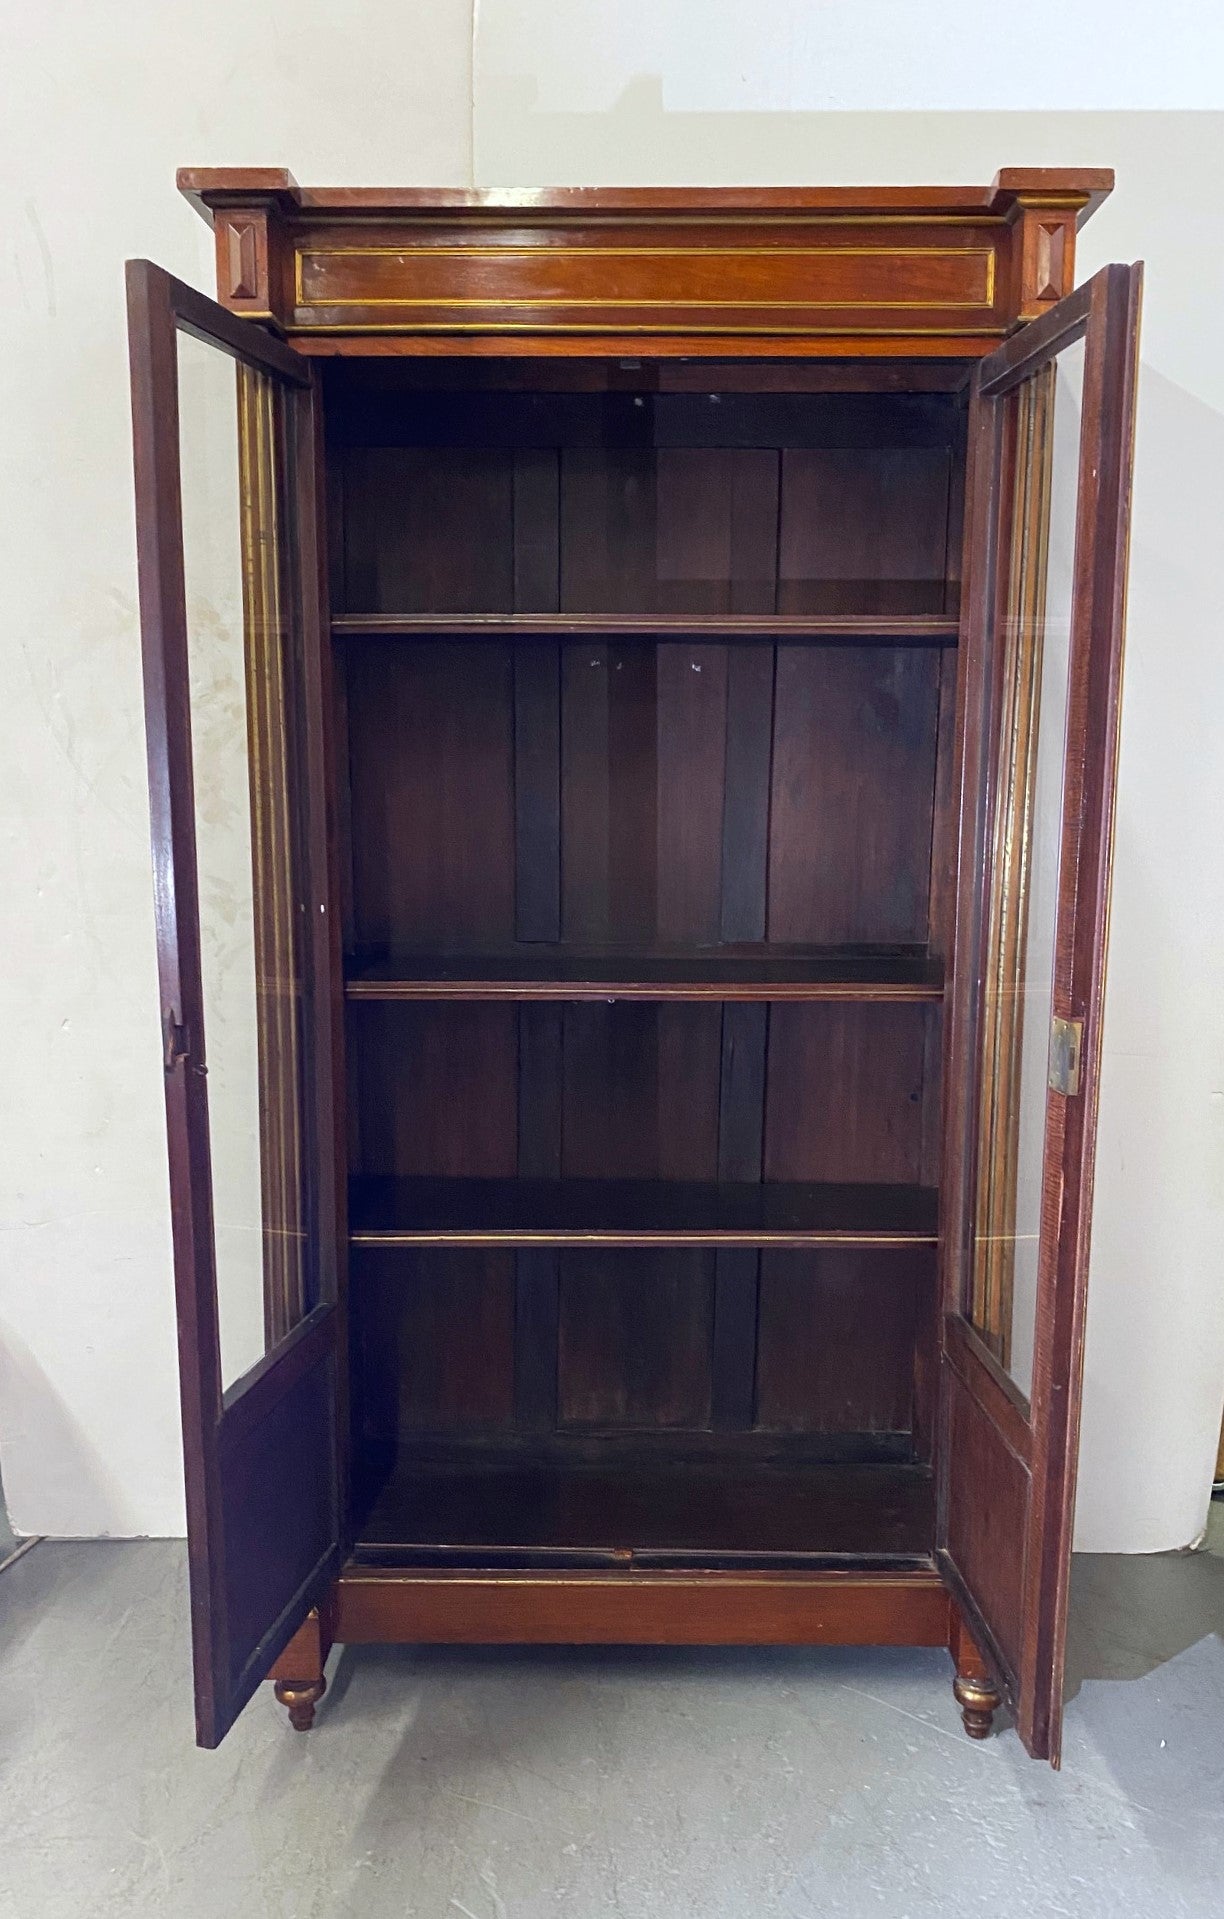 Empire-style cabinet/bookcase. Two glass doors with collum on each side adjustable and shelves with. The cabinet has gold finish brass accents and an original key.